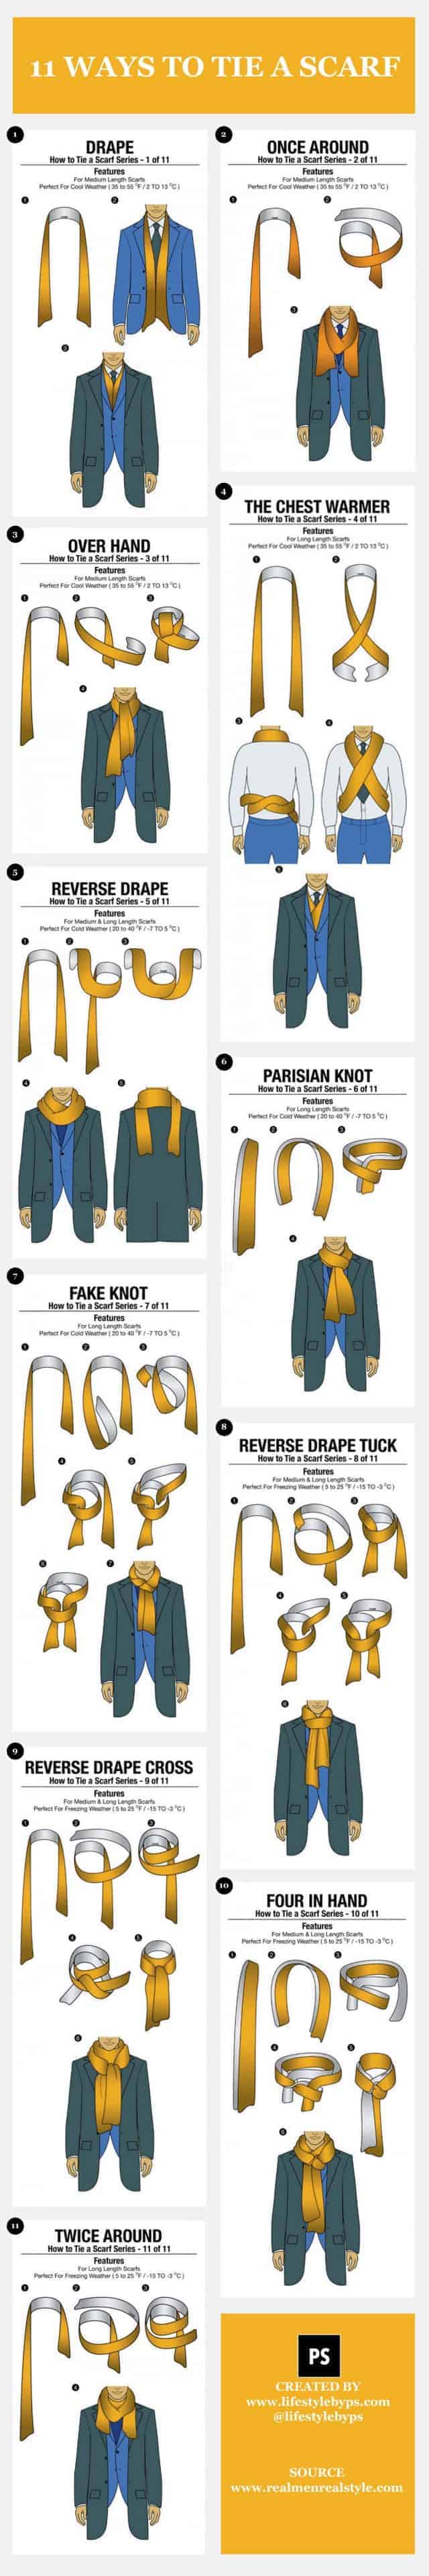 11 Simple Ways to Tie a Scarf